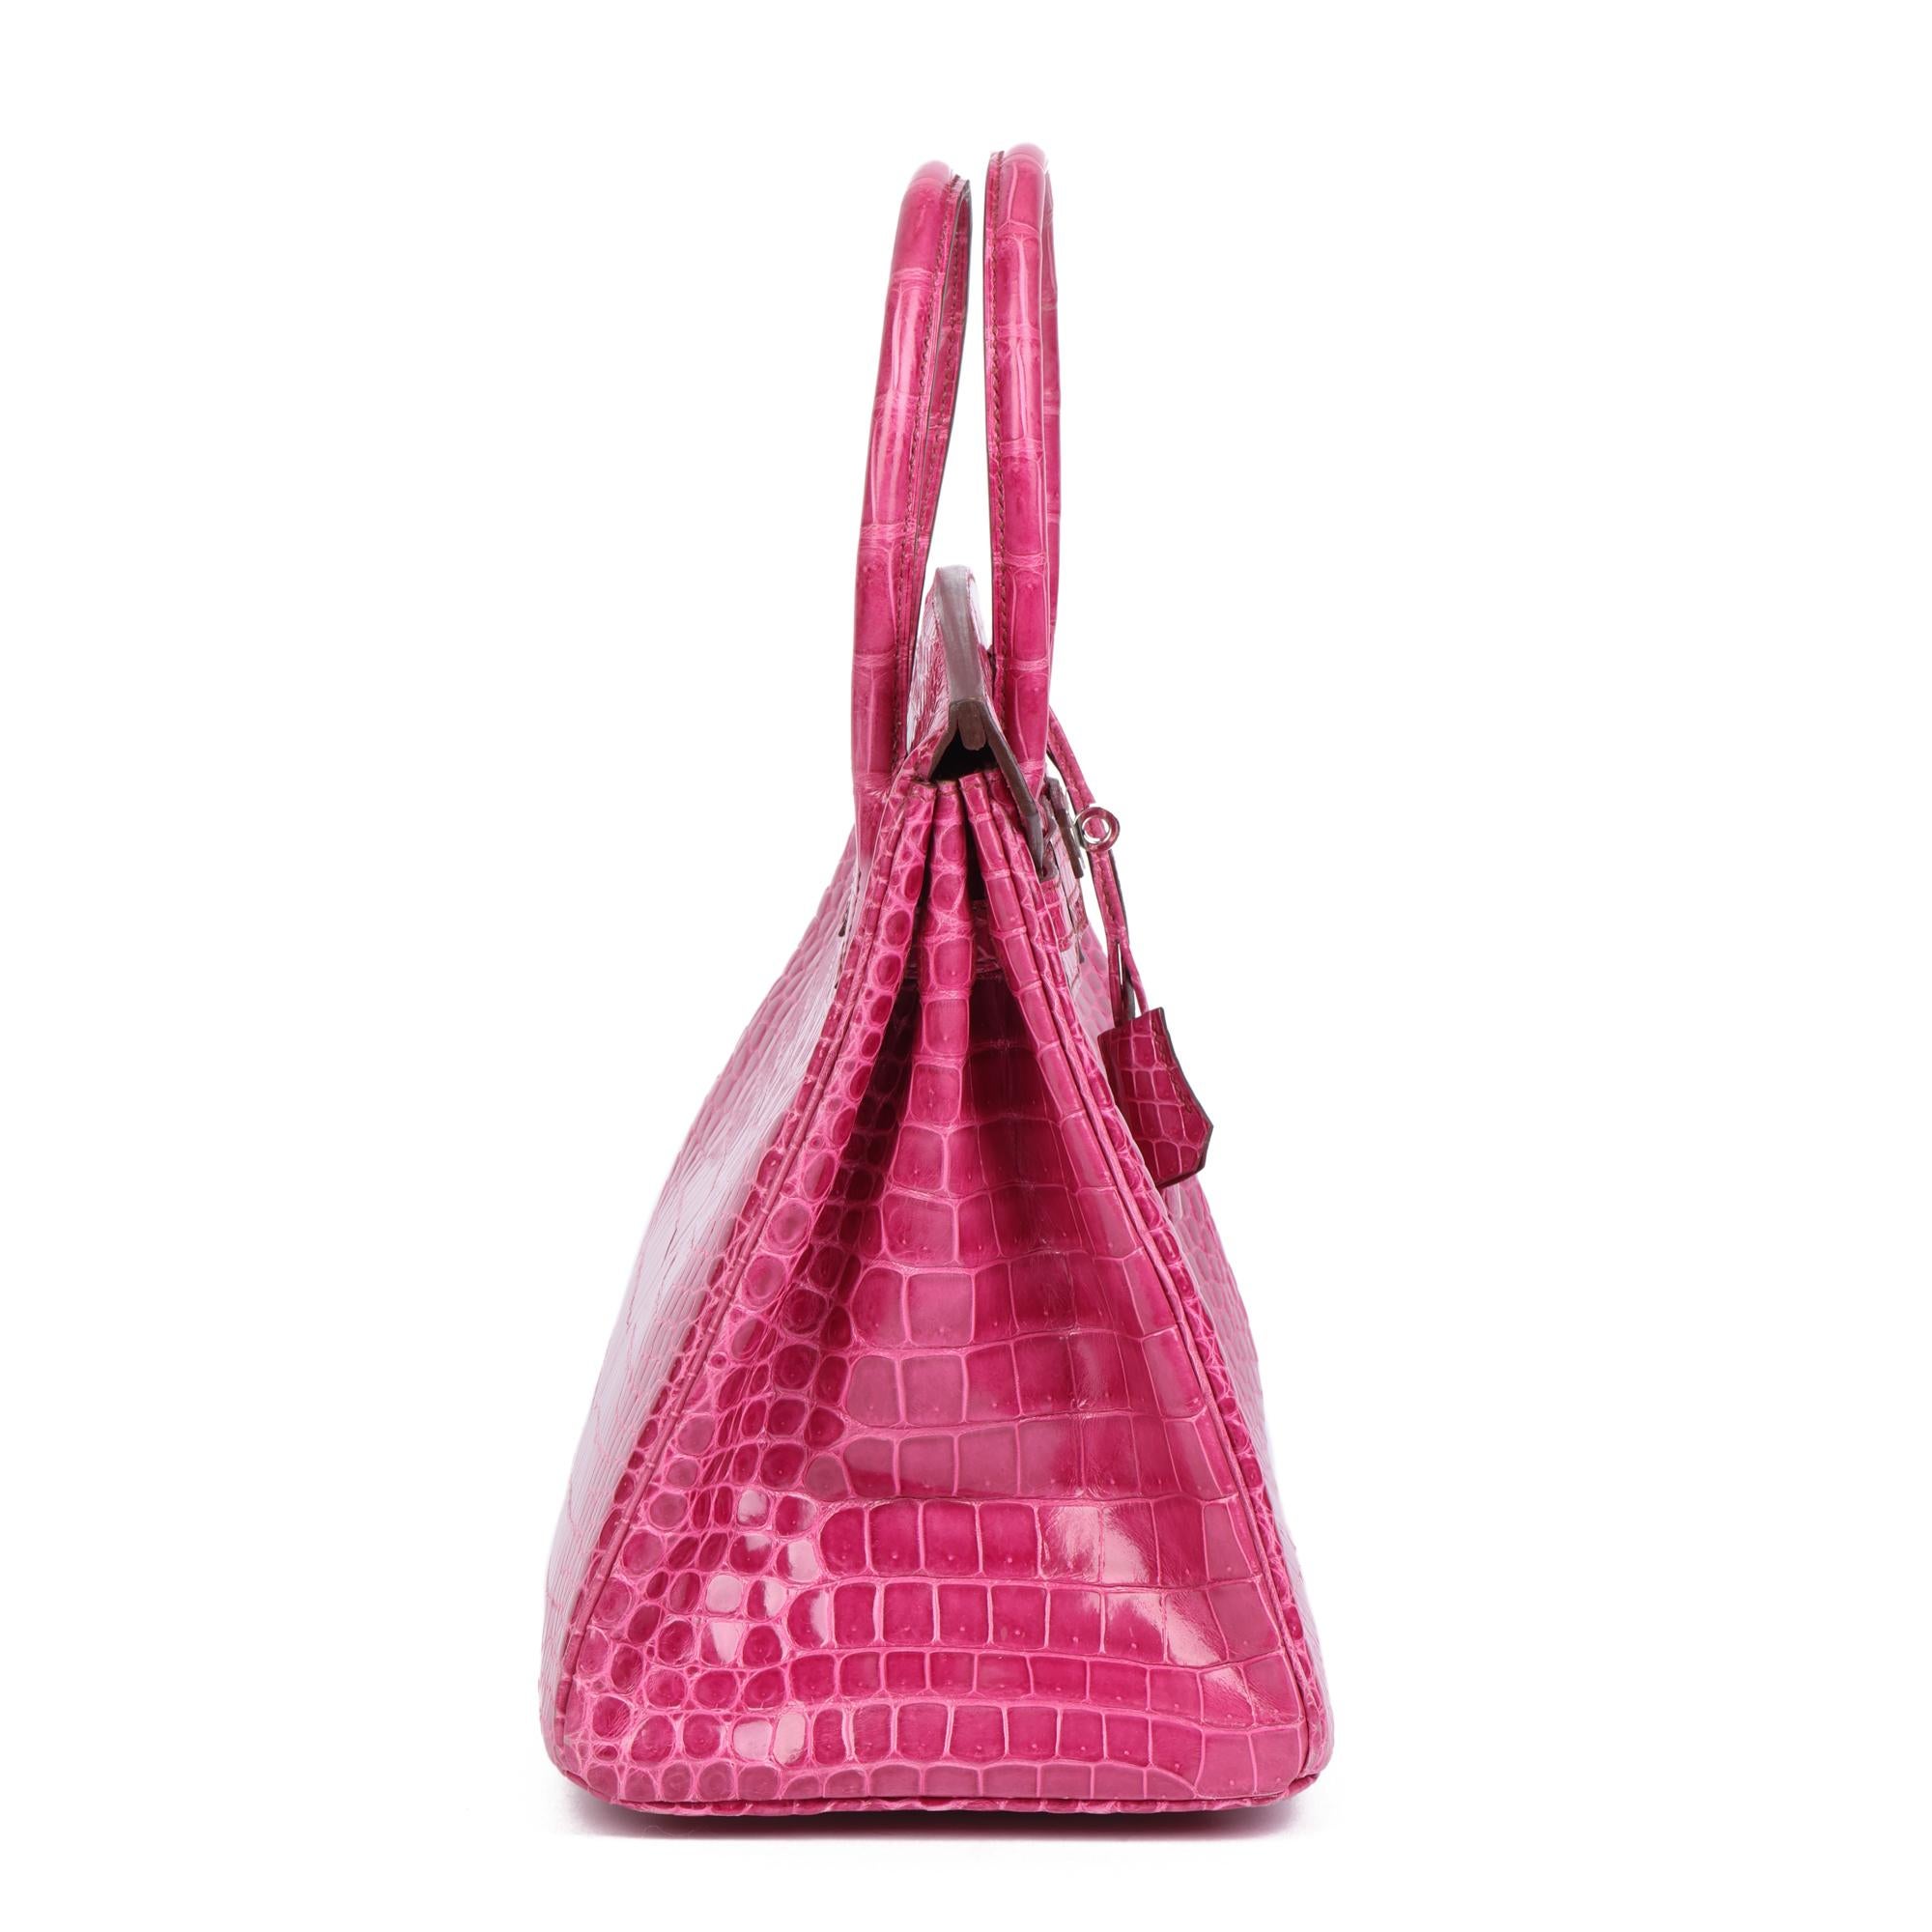 HERMÈS
Fuschia Shiny Porosus Crocodile Leather Birkin 35cm Retourne

Xupes Reference: CB476
Serial Number: [N]
Age (Circa): 2010
Accompanied By: Hermès Dust Bag, Lock, Keys, Clochette
Authenticity Details: Date Stamp (Made in France)
Gender: